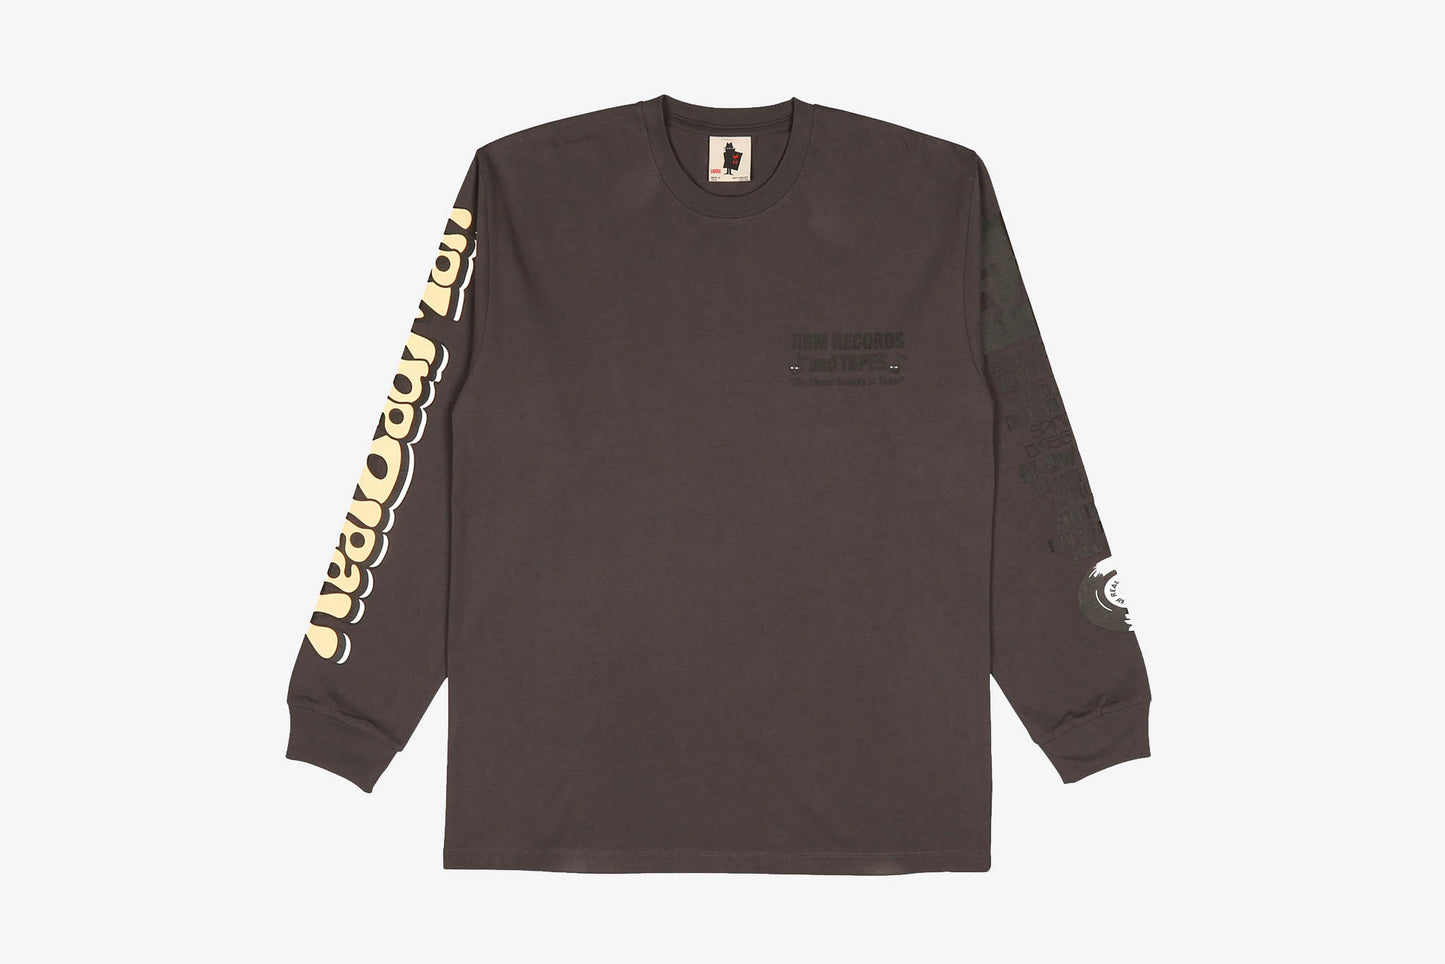 Real Bad Man "Records and Tapes LS Tee" M - Black